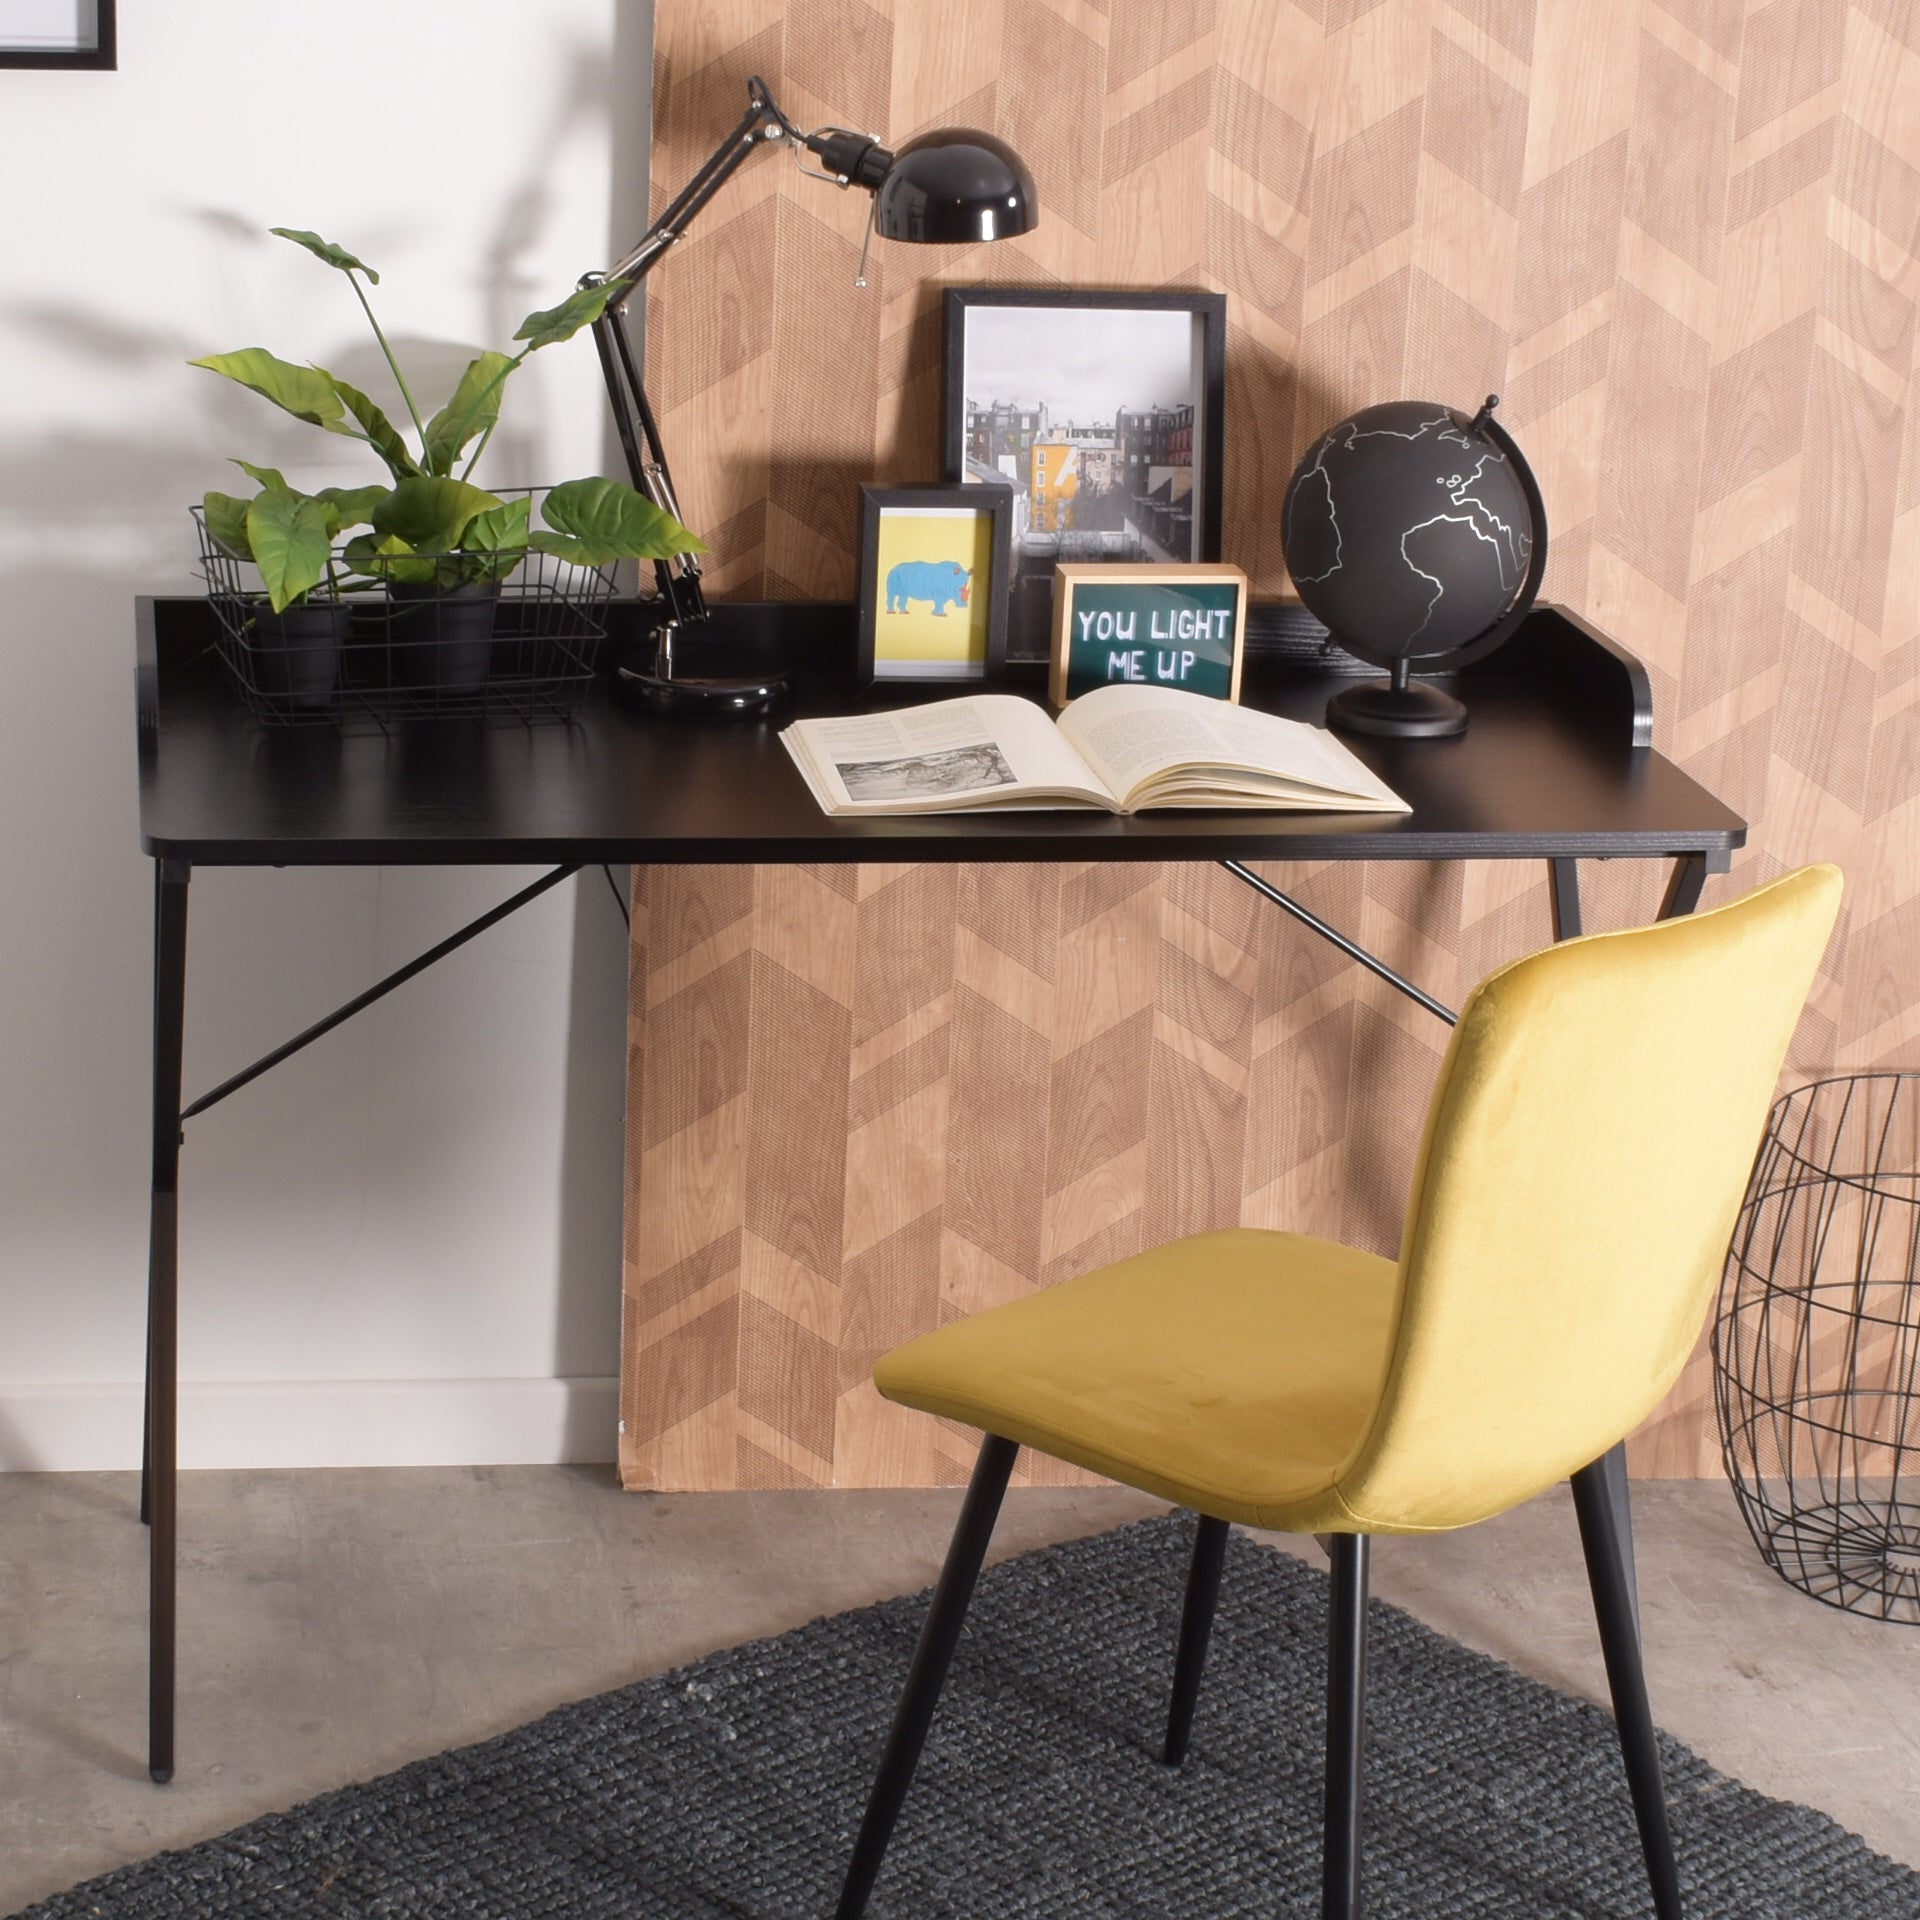 Industrial Modern Computer Desk with Natural Wood Effect Storage, in Wood and Metal - AVA JM